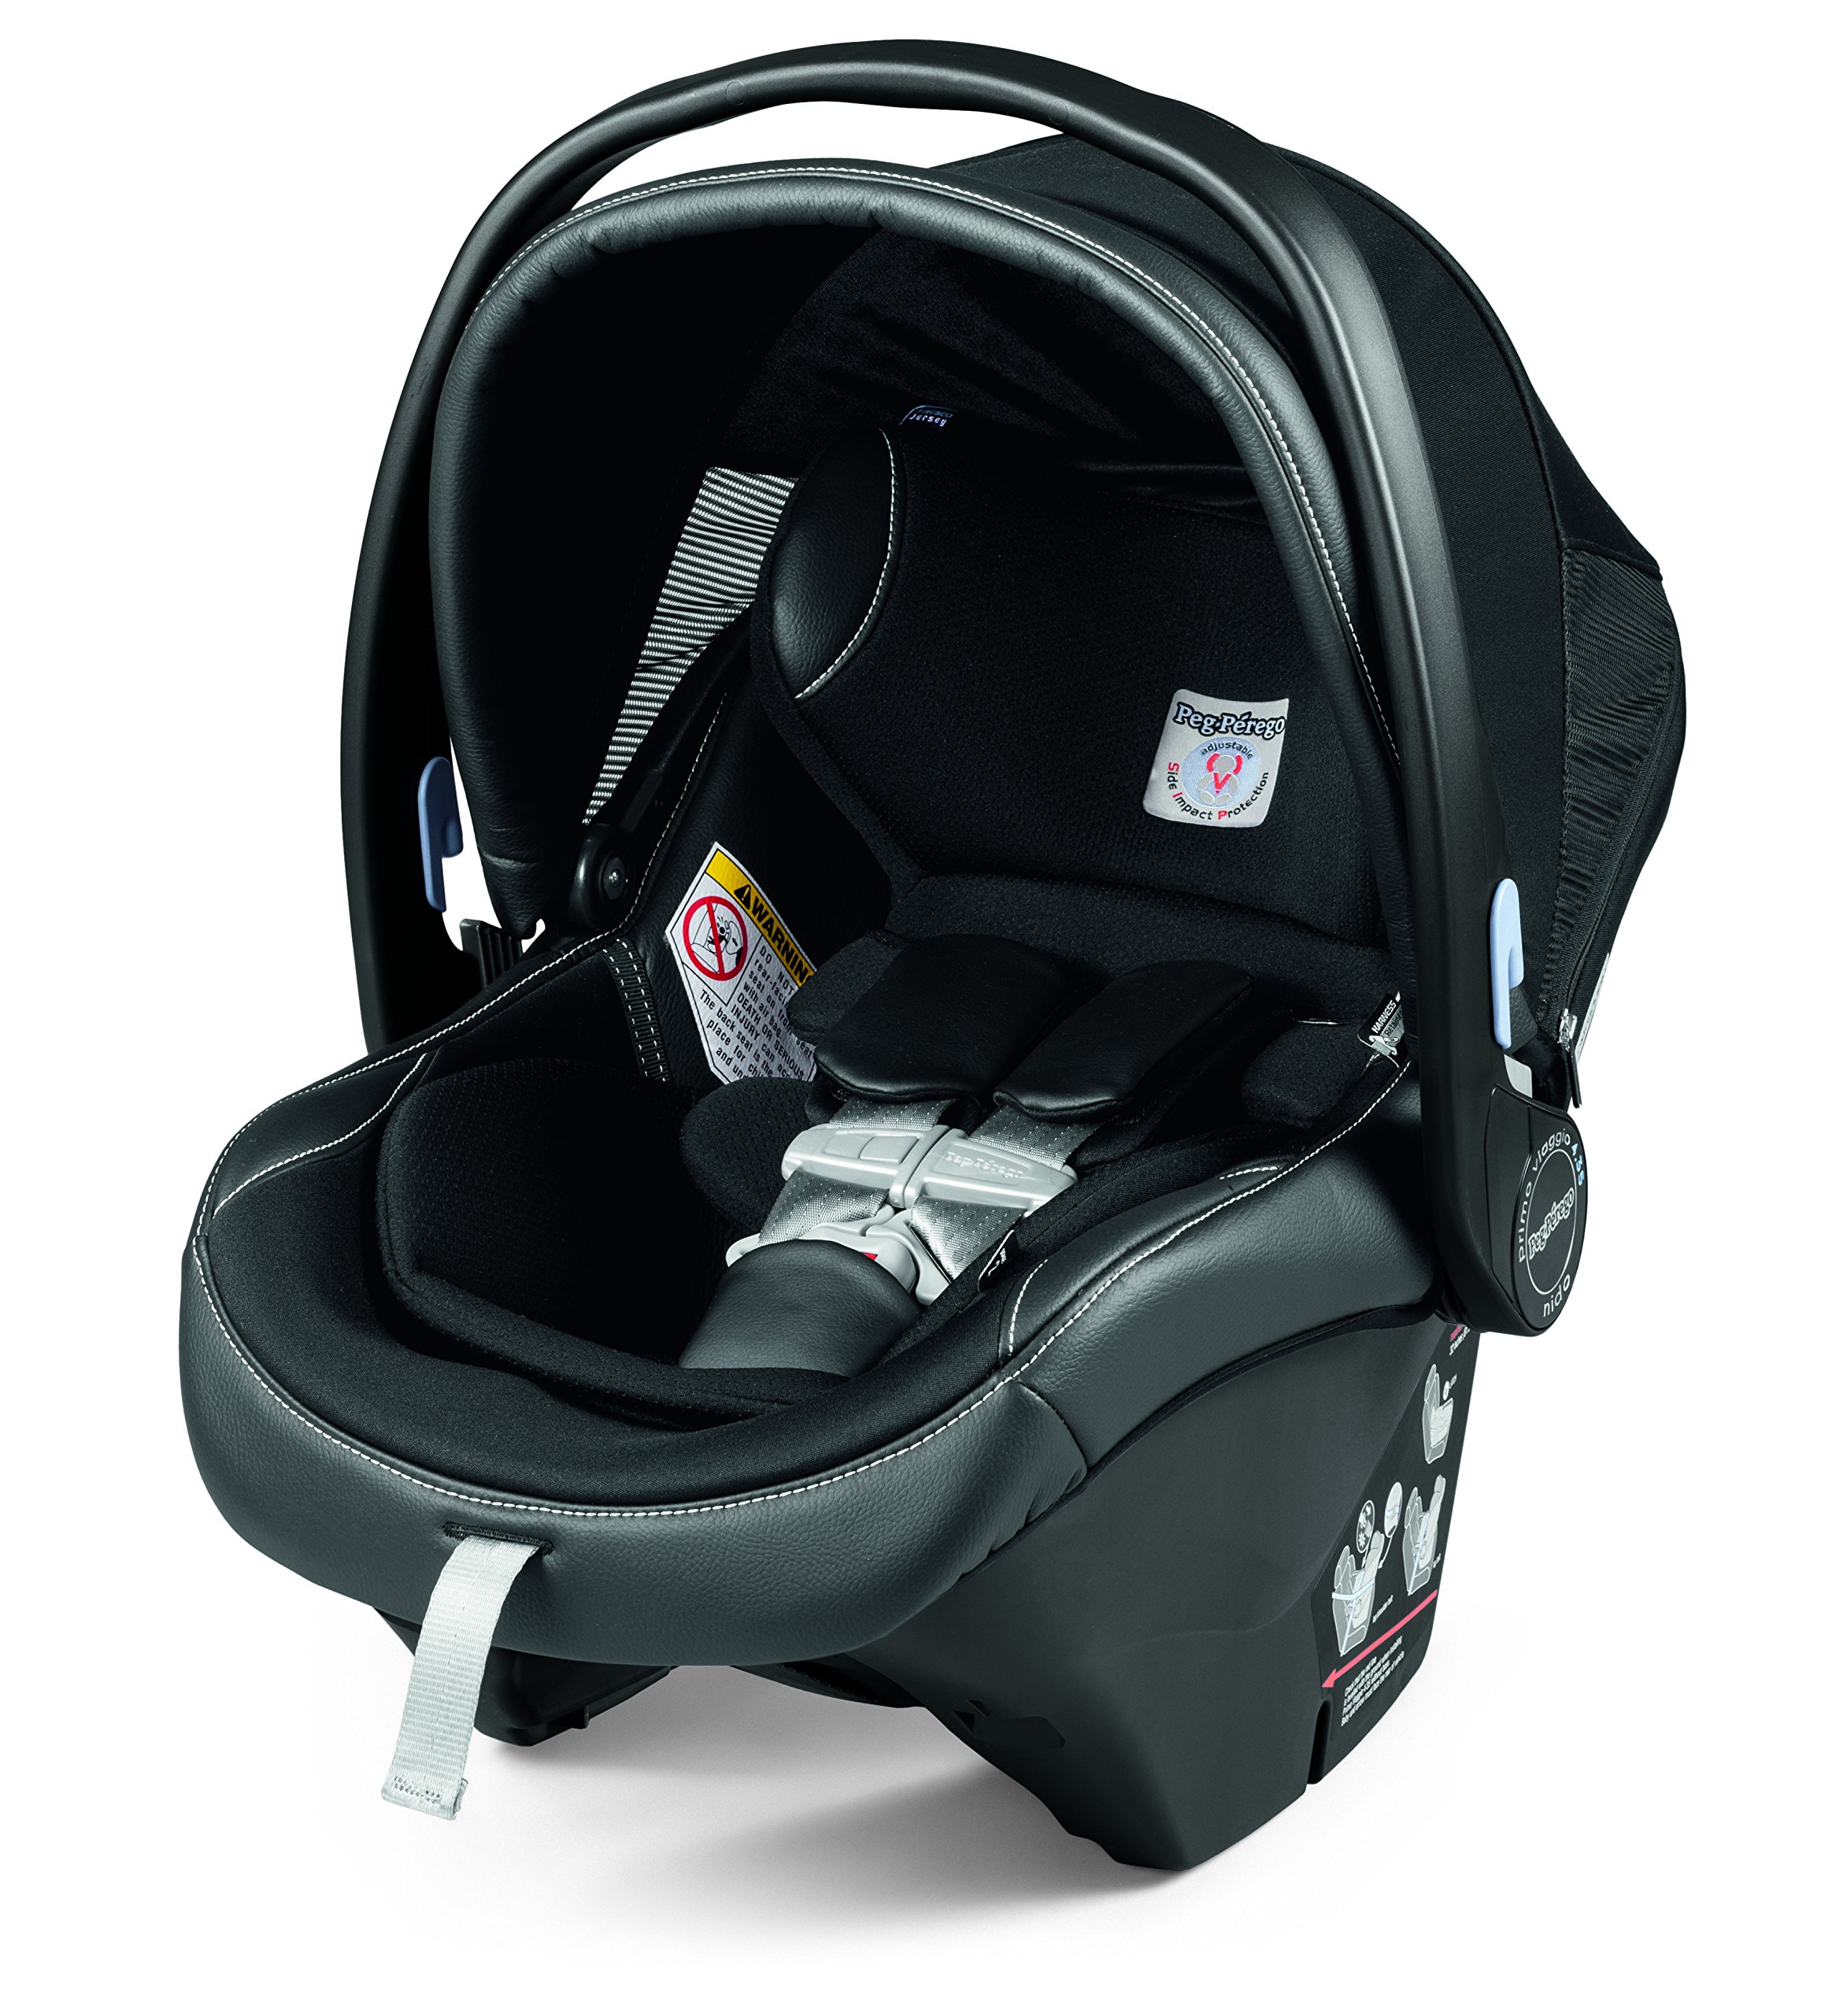 Peg Perego Primo Viaggio 4-35 Nido - Rear Facing Infant Car Seat - Includes Base with Load Leg & Anti-Rebound Bar - for Babies 4 to 35 lbs - Made in Italy - Licorice (Black)